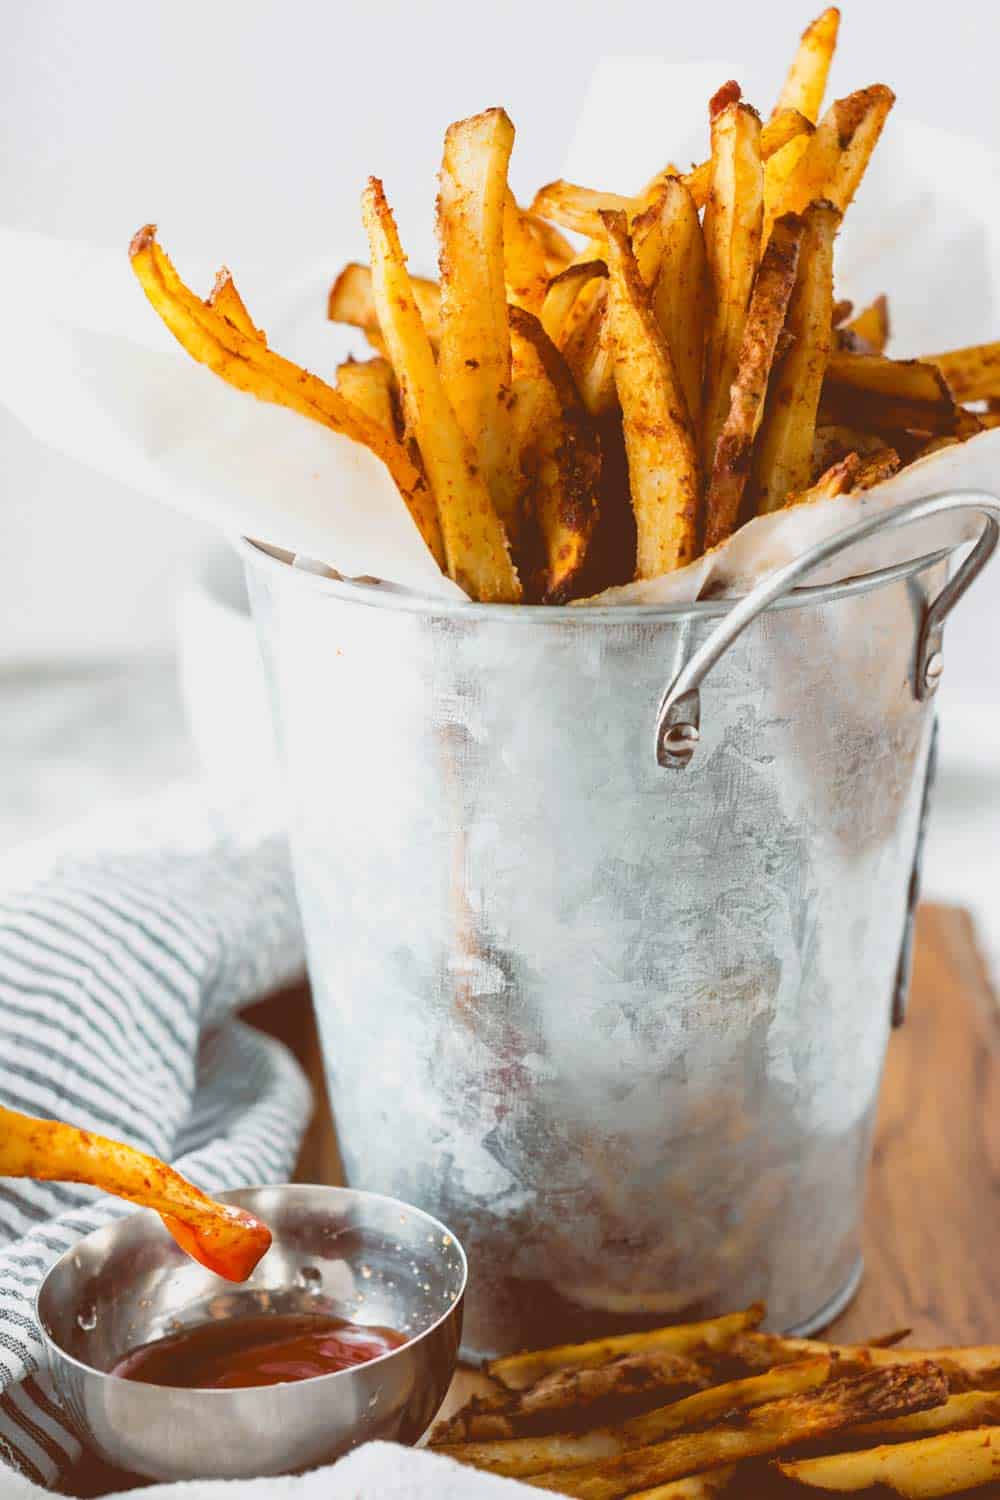 OVEN-BAKED BARBECUE FRIES BY HEALTHIER STEPS